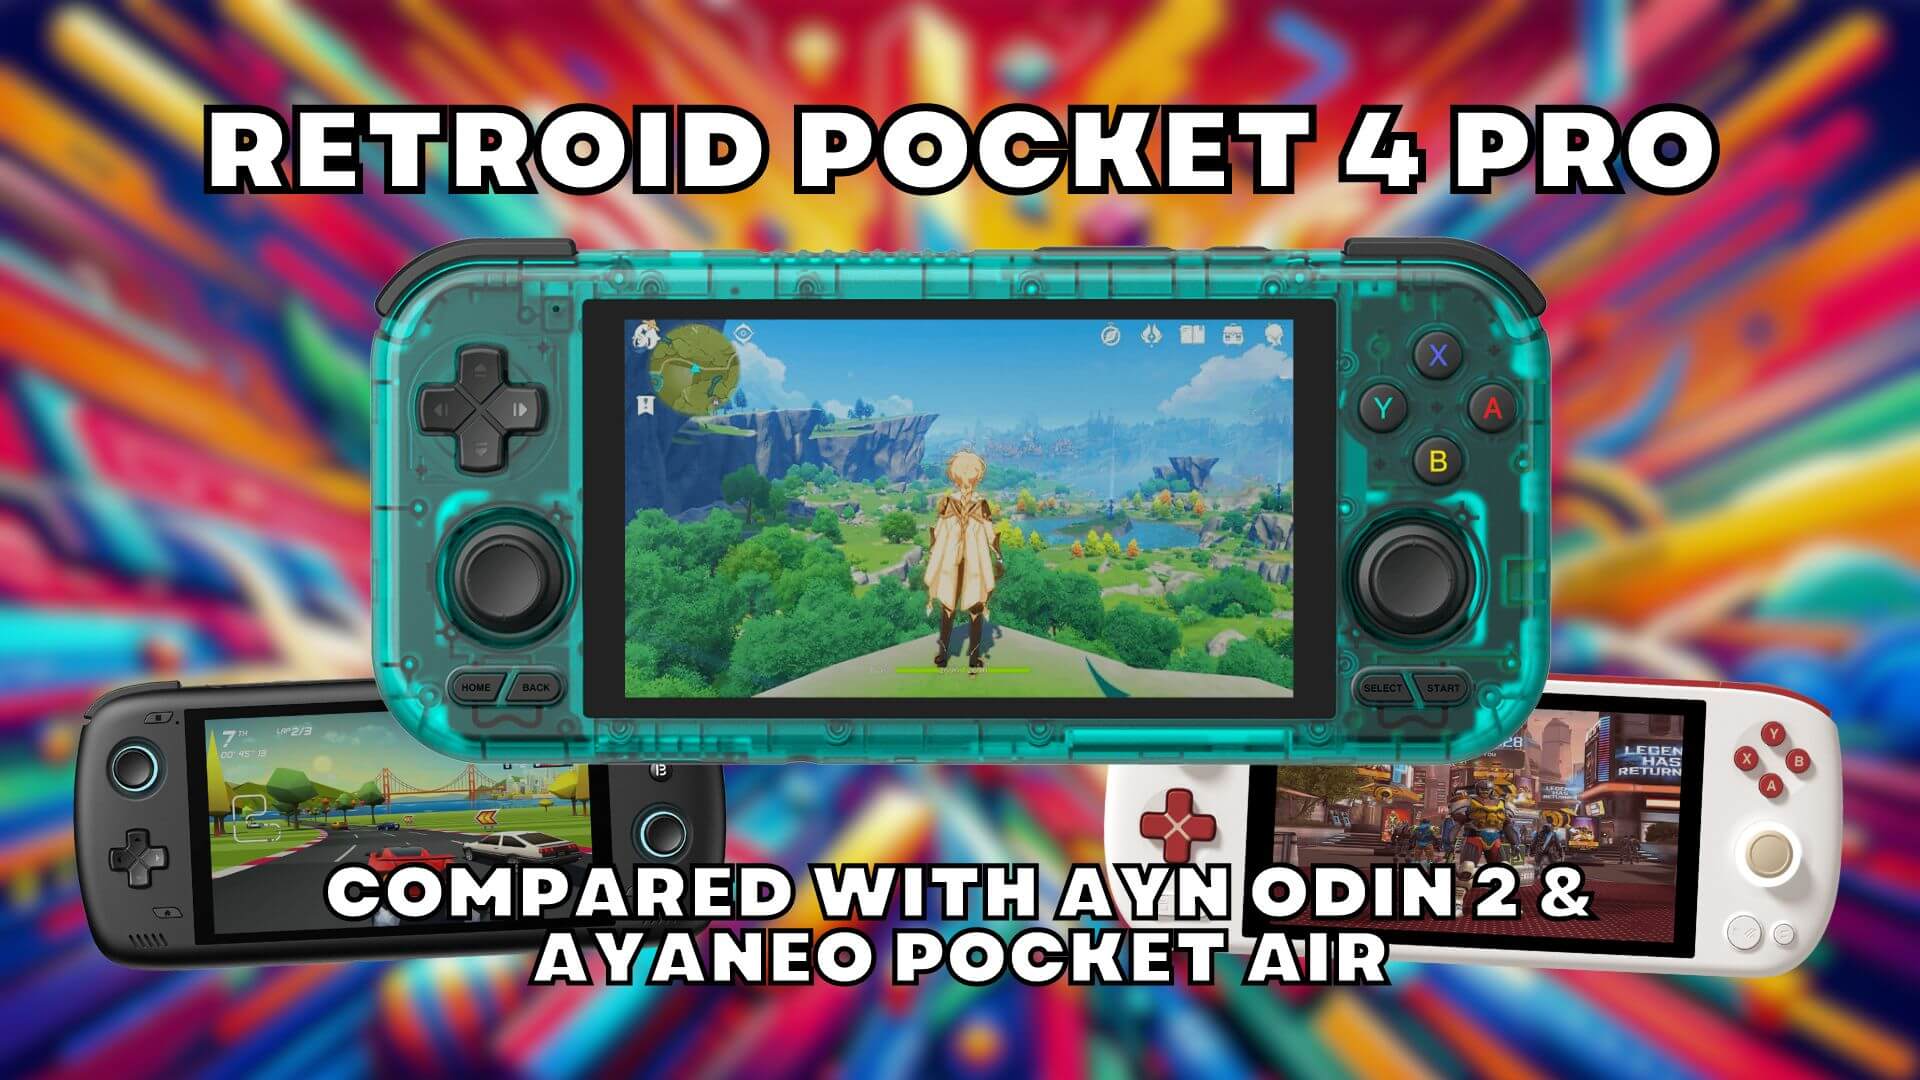 Retroid Pocket 4 PRO Review with video – Excellent price vs performance Android handheld